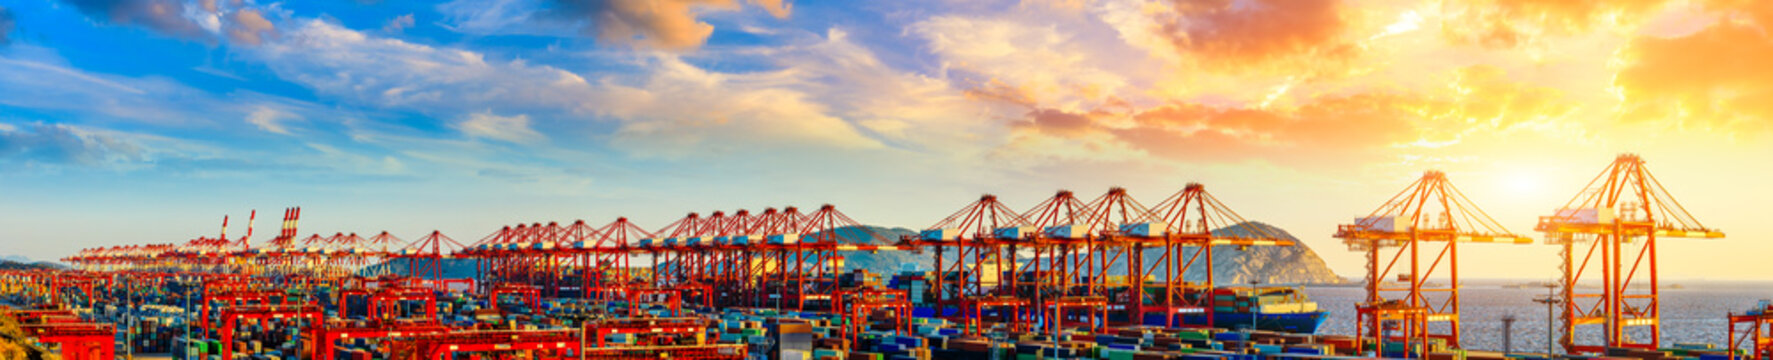 Industrial container freight port at beautiful sunset in Shanghai,China.